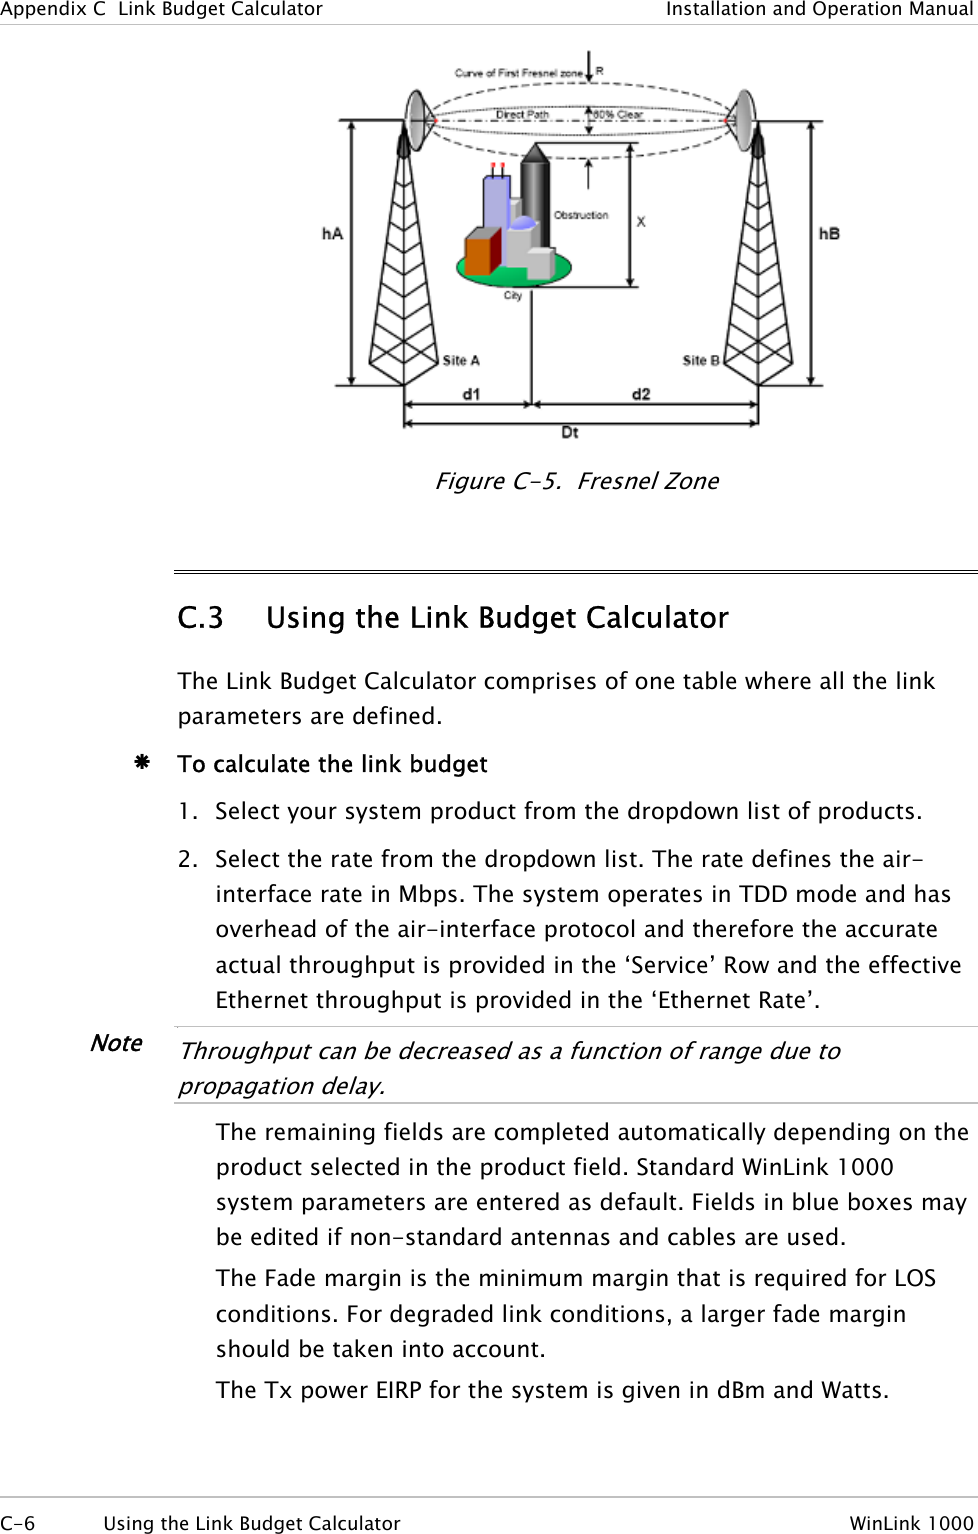 Appendix  C  Link Budget Calculator  Installation and Operation Manual  Figure  C-5.  Fresnel Zone C.3 Using the Link Budget Calculator The Link Budget Calculator comprises of one table where all the link parameters are defined. Æ To calculate the link budget 1. Select your system product from the dropdown list of products. 2. Select the rate from the dropdown list. The rate defines the air-interface rate in Mbps. The system operates in TDD mode and has overhead of the air-interface protocol and therefore the accurate actual throughput is provided in the ‘Service’ Row and the effective Ethernet throughput is provided in the ‘Ethernet Rate’. Note •  Throughput can be decreased as a function of range due to propagation delay.  The remaining fields are completed automatically depending on the product selected in the product field. Standard WinLink 1000 system parameters are entered as default. Fields in blue boxes may be edited if non-standard antennas and cables are used. The Fade margin is the minimum margin that is required for LOS conditions. For degraded link conditions, a larger fade margin should be taken into account. The Tx power EIRP for the system is given in dBm and Watts. C-6  Using the Link Budget Calculator  WinLink 1000  